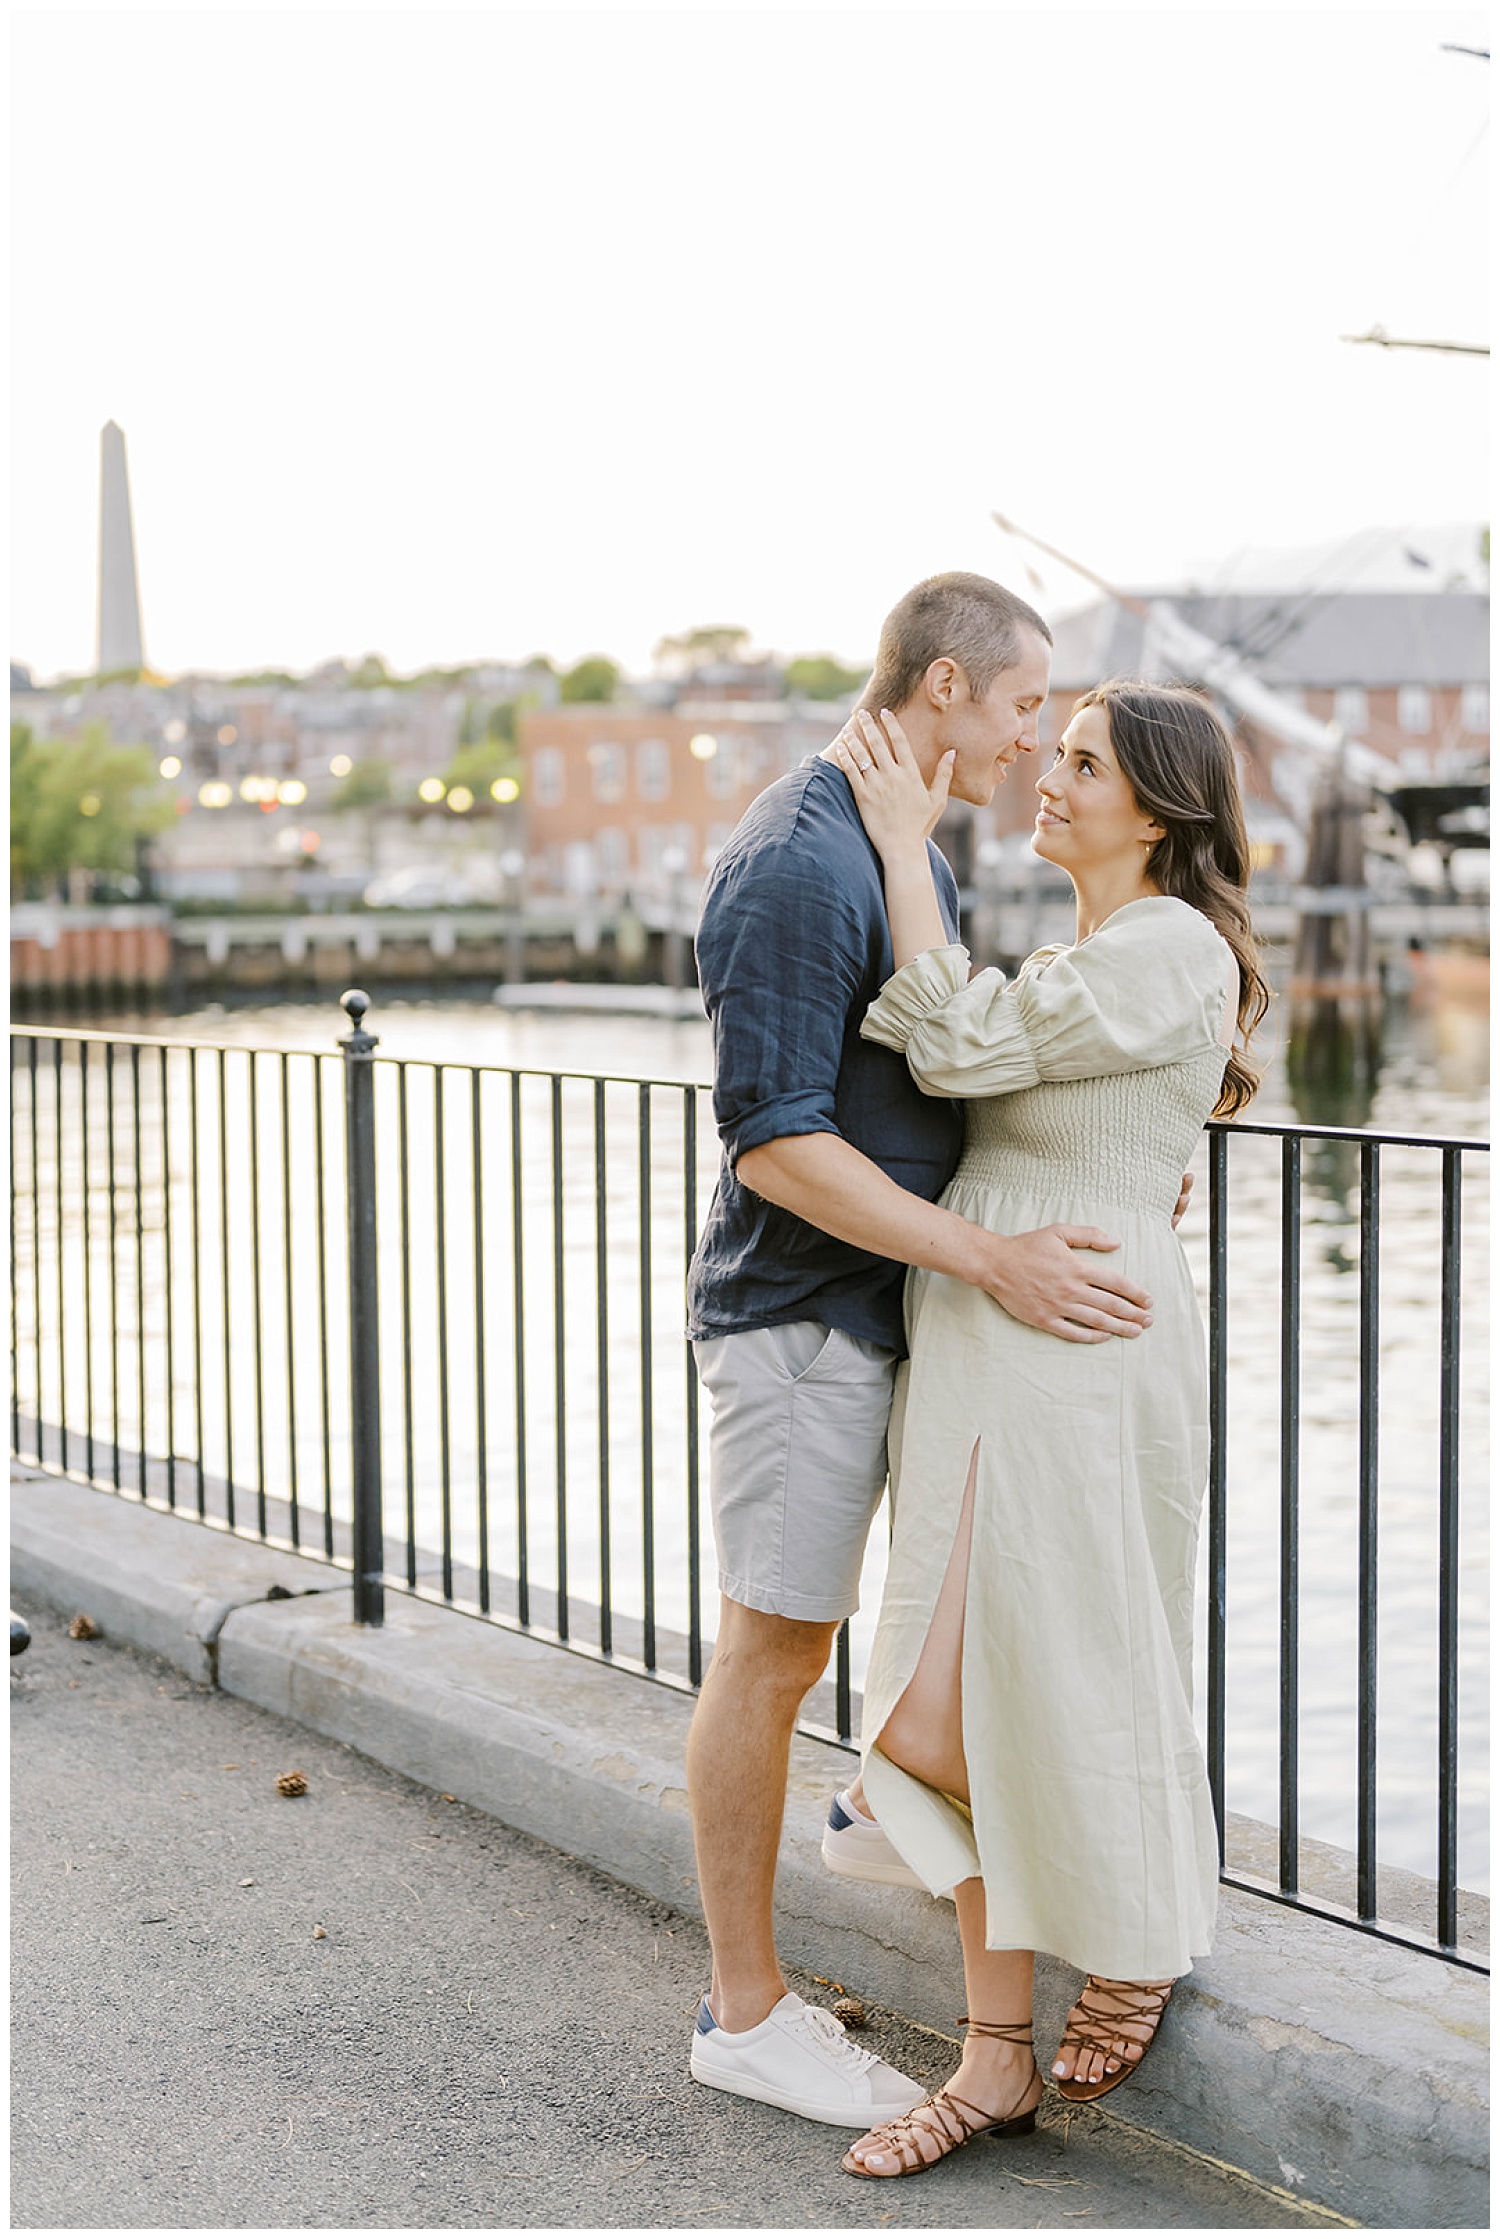 Maine wedding photographer shooting engagement session in Boston